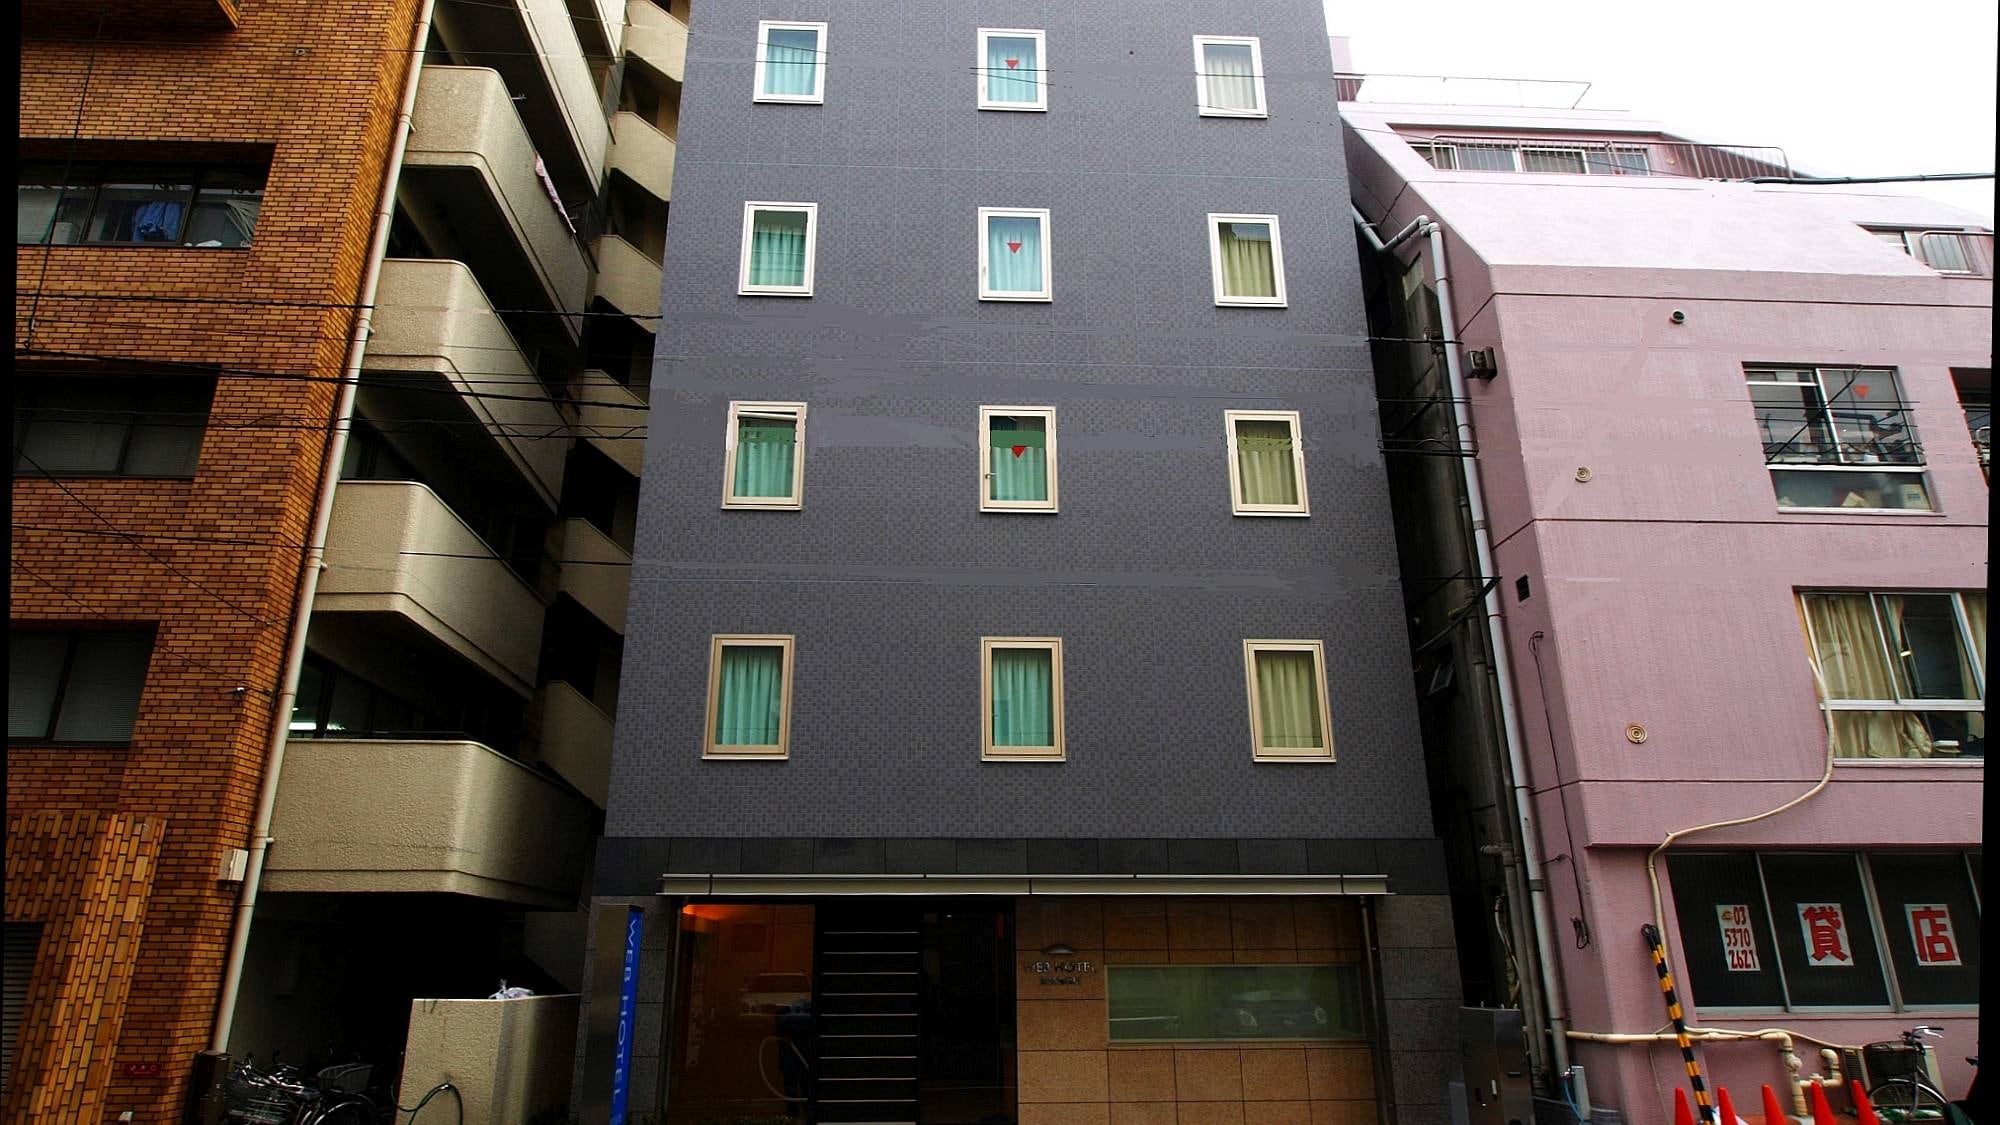 · Appearance: 1 minute walk from the A6 exit of Asakusabashi subway station